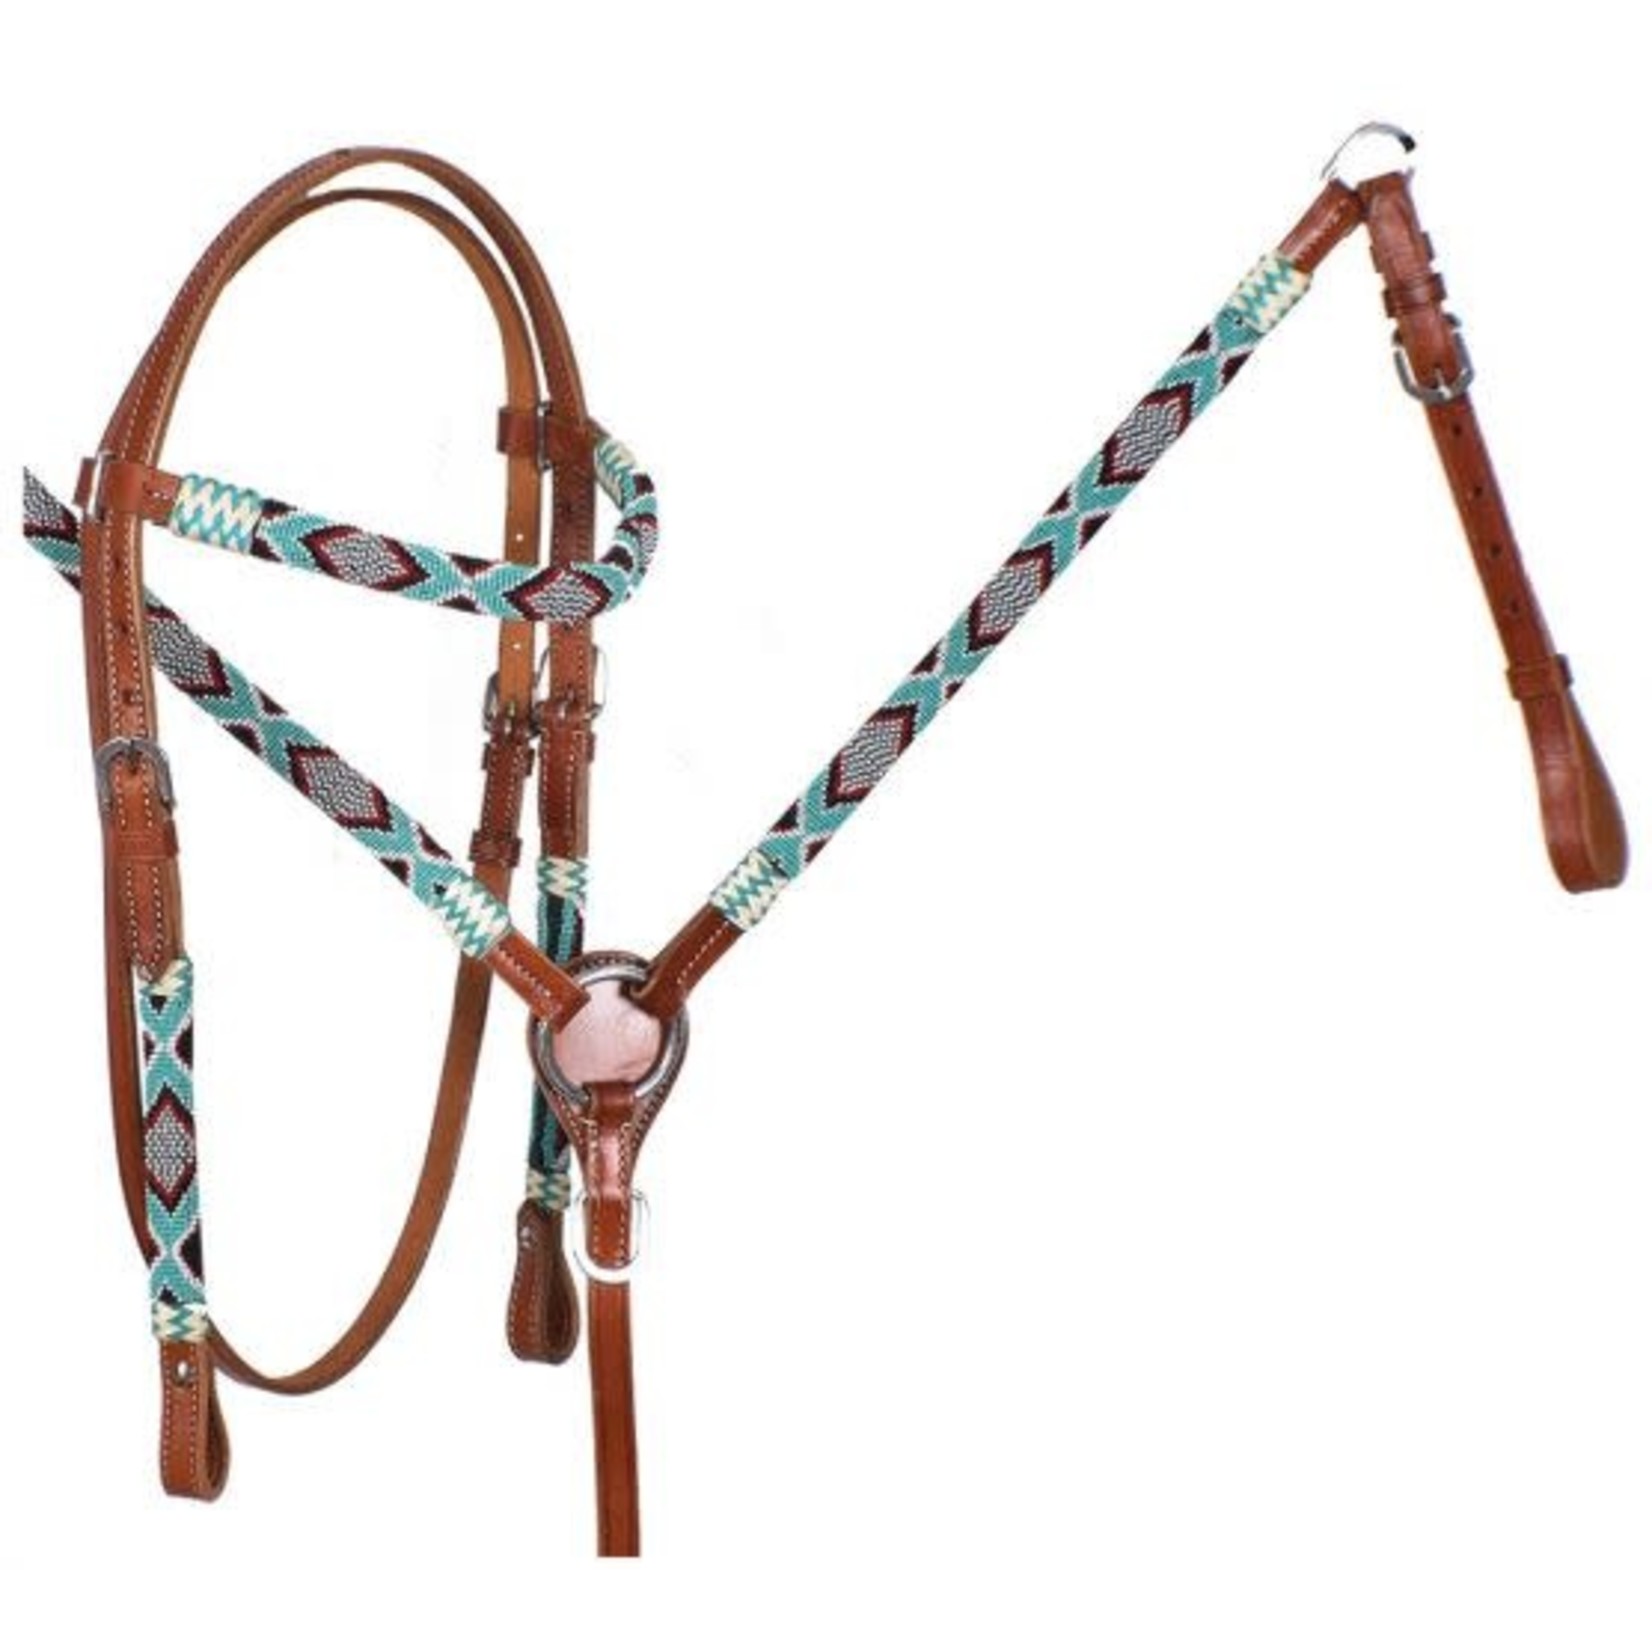 Showman Turquoise and Red Beaded headstall and breast collar set